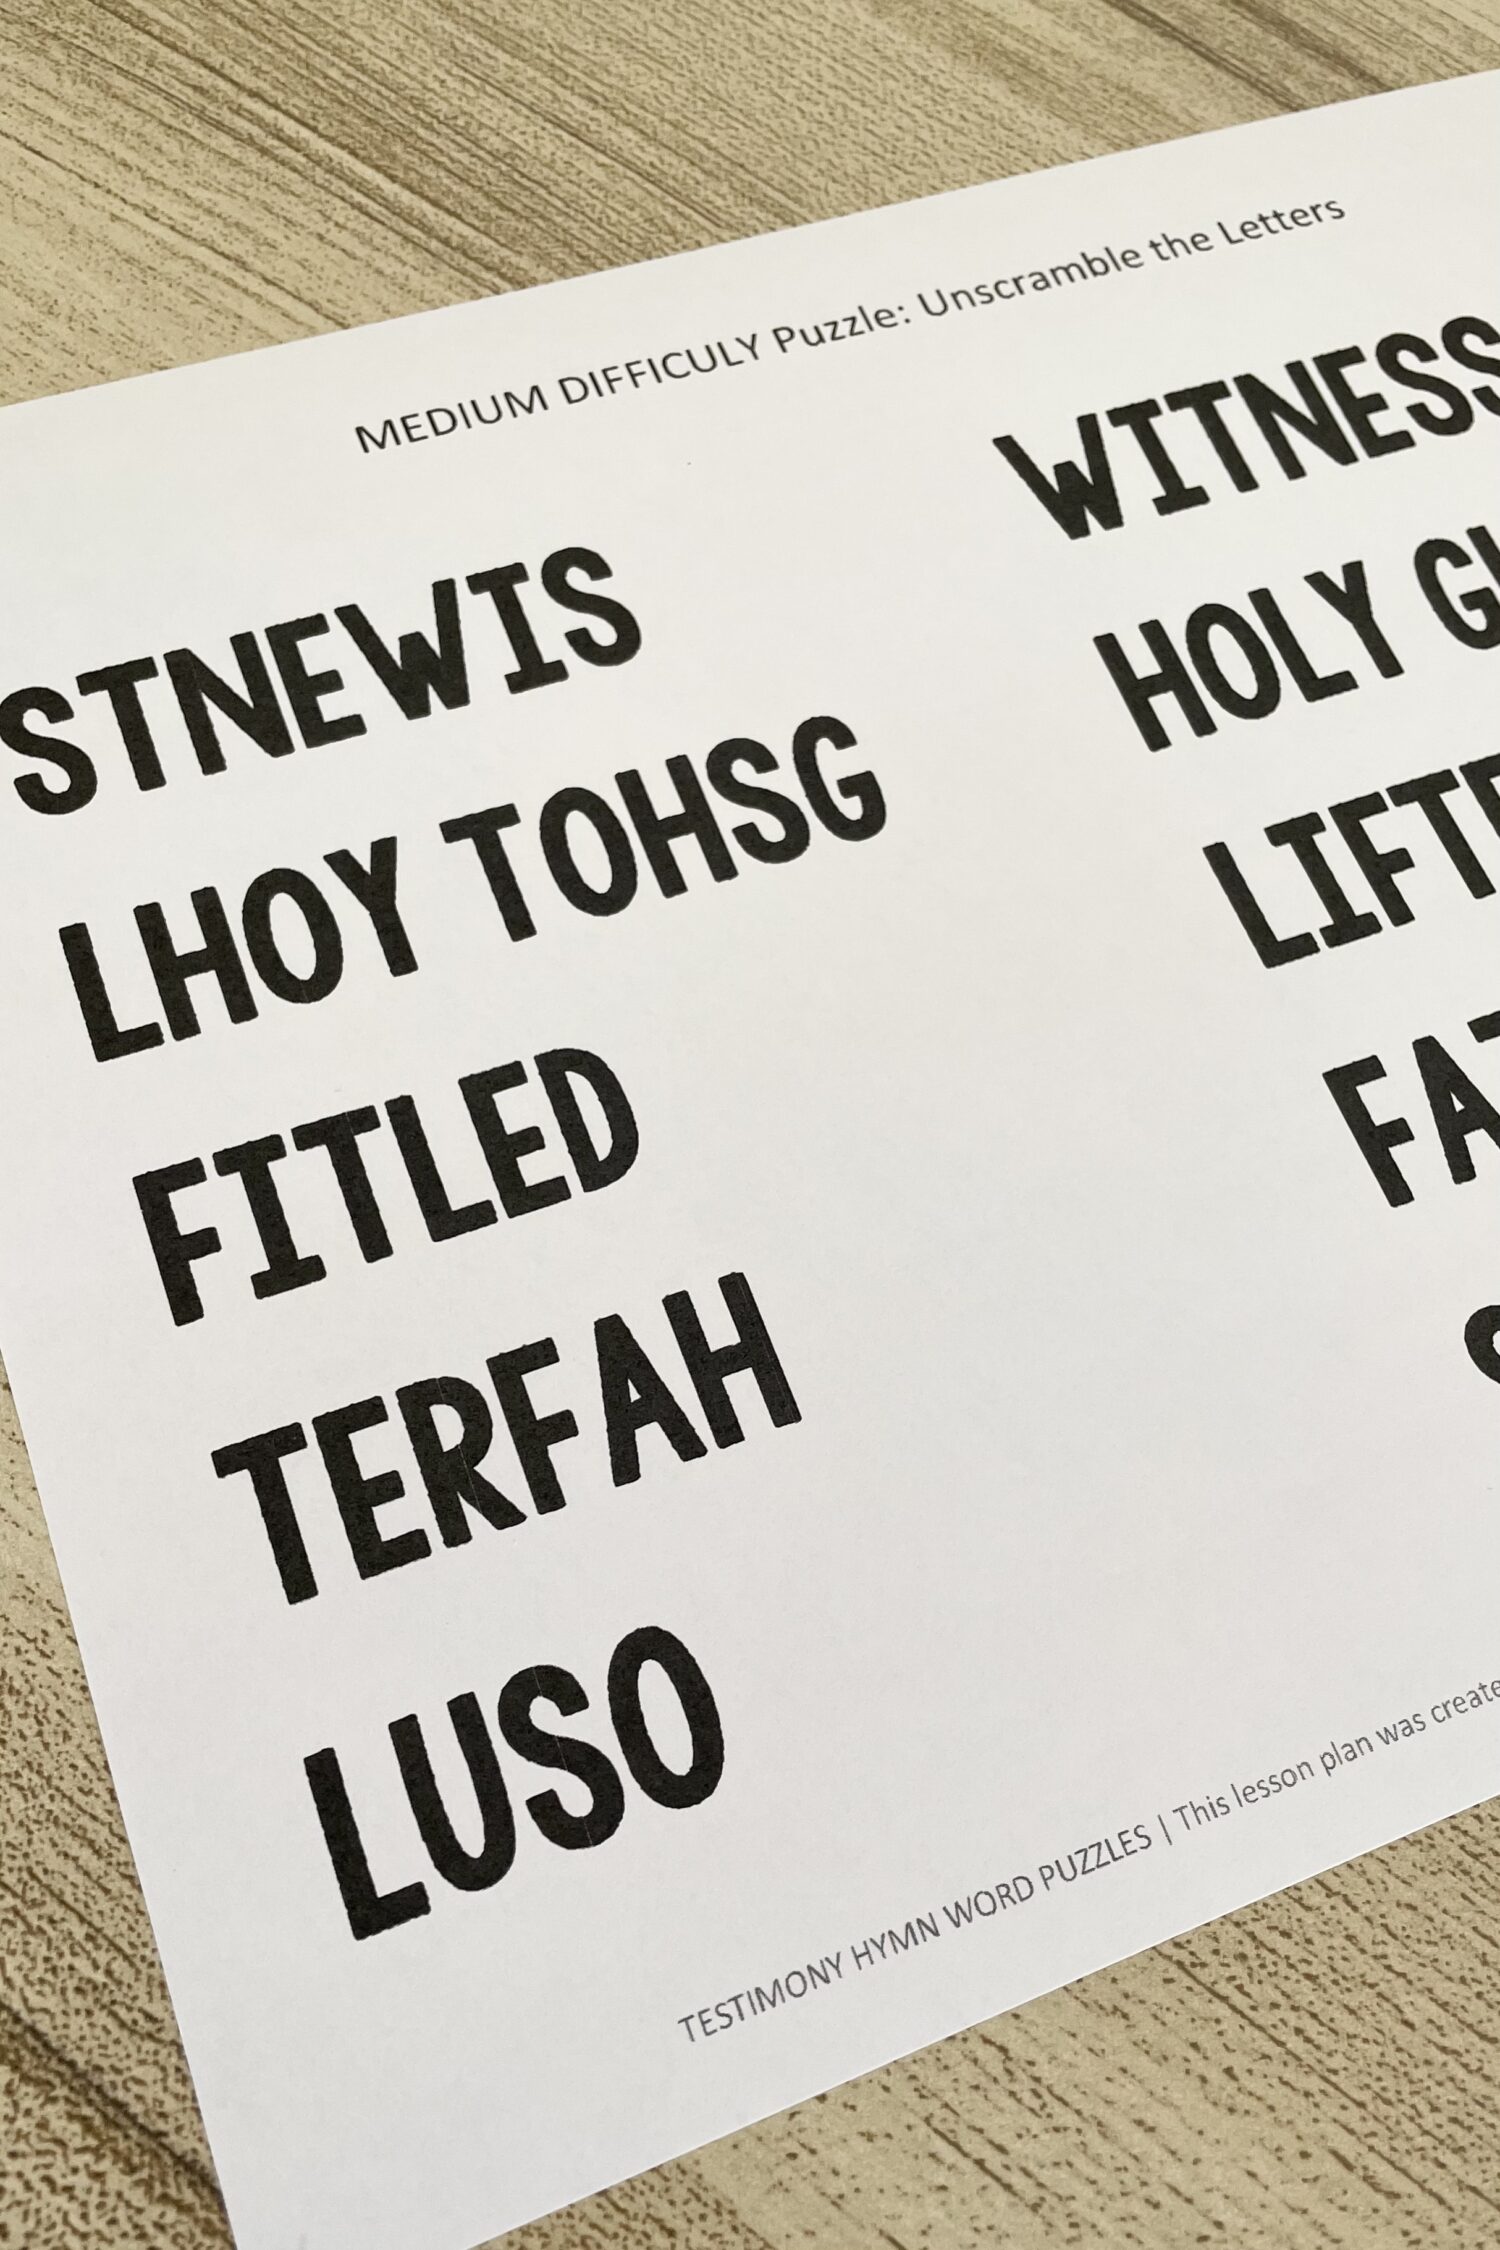 Testismony Hymn Word Puzzles - Have some fun in primary with 3 different word puzzles to try! Fill in the blank, unscramble the letters, or rearrange the lyrics with this fun review idea with printable song helps for LDS Primary Music Leaders.